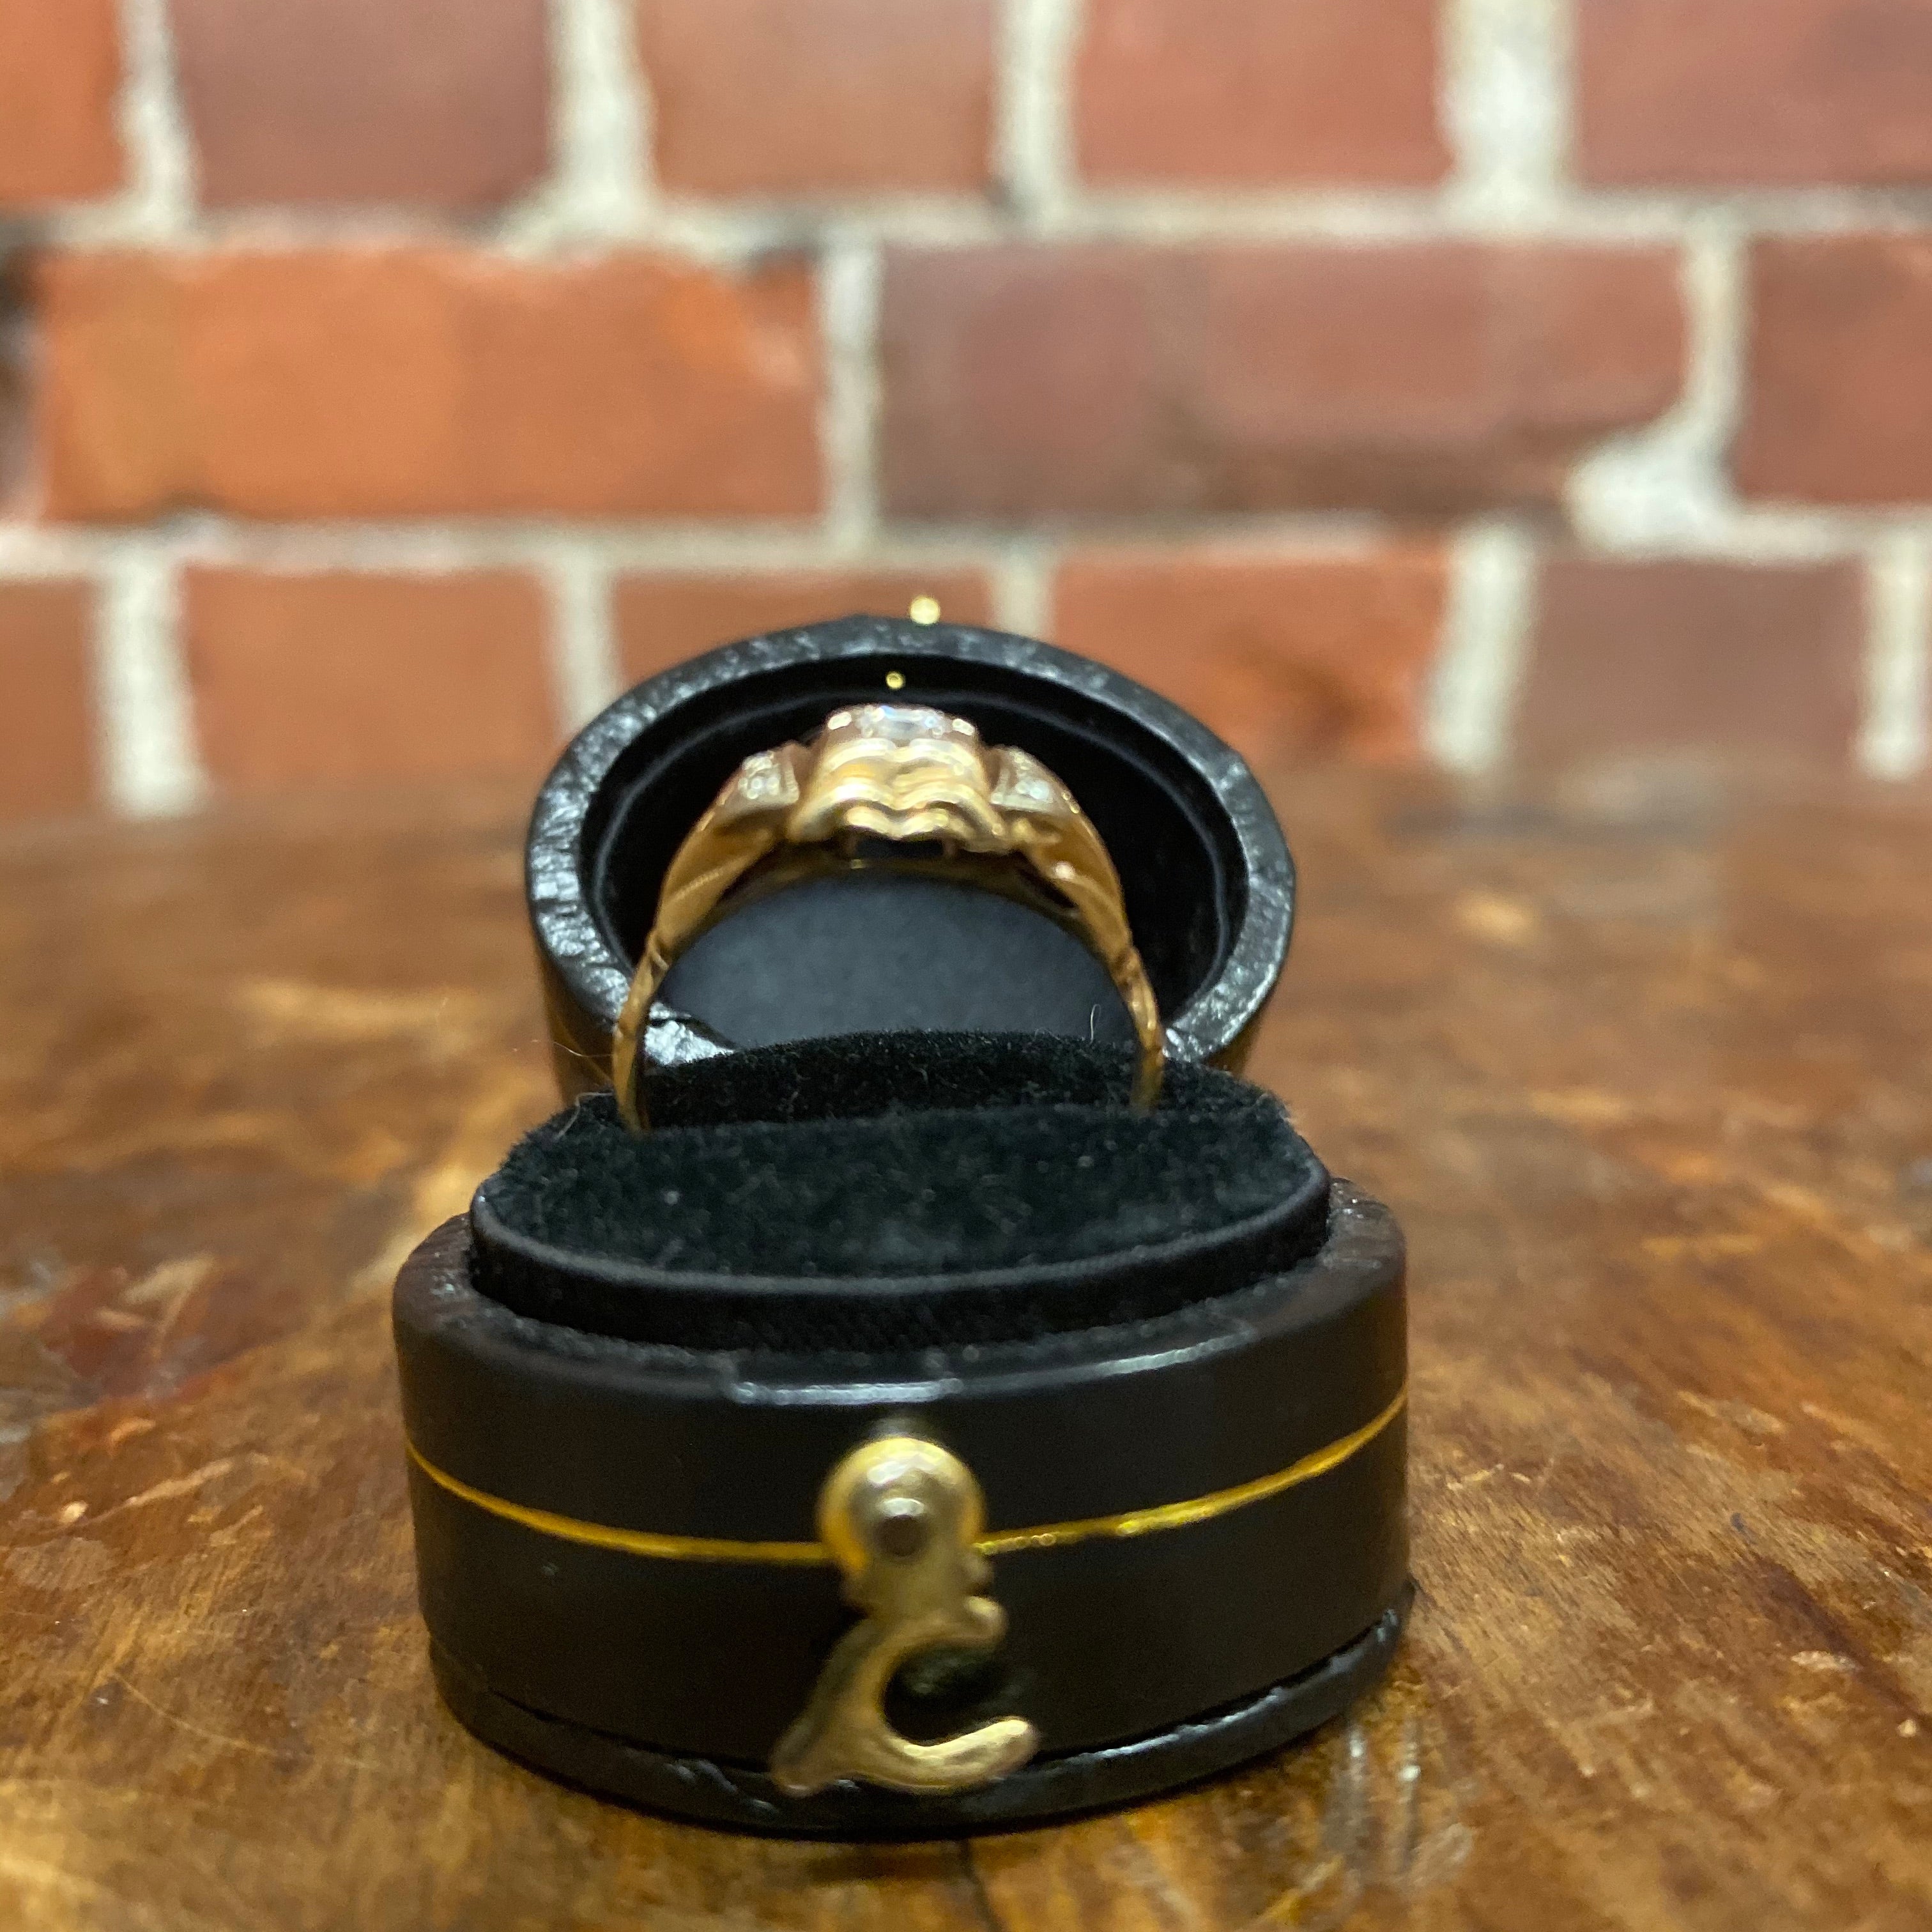 1920s 14K gold and diamond ring